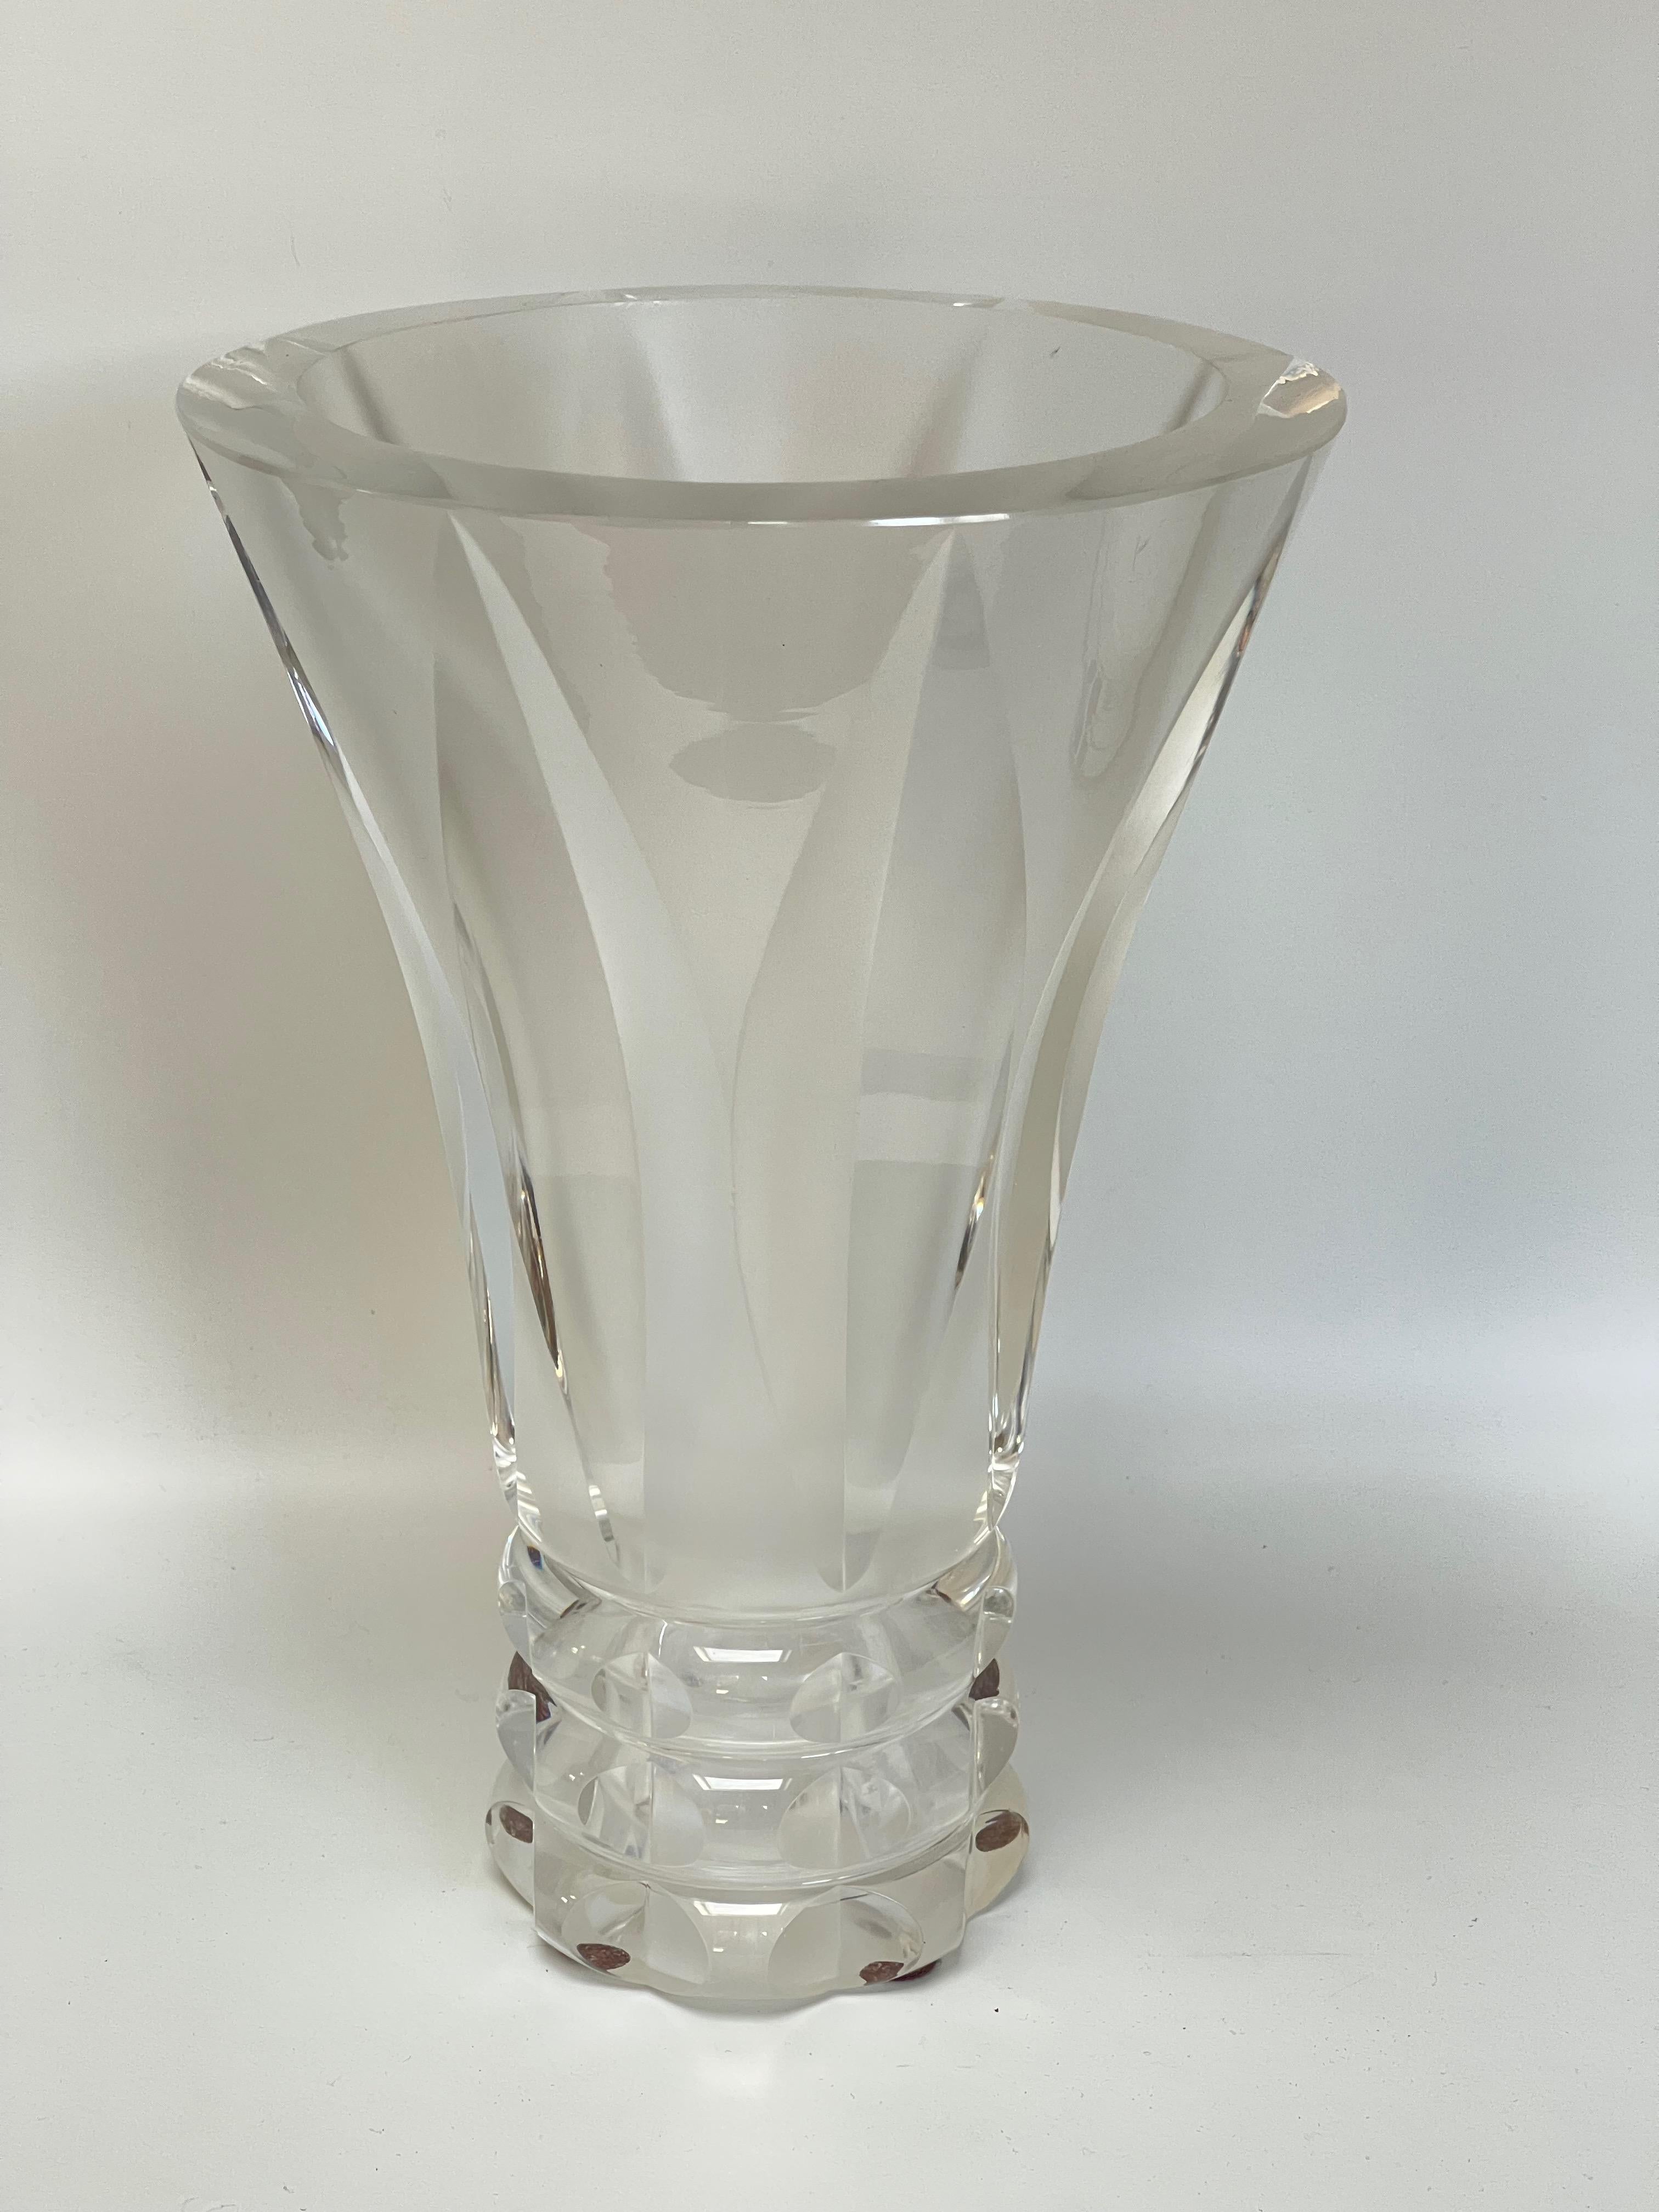 Large cut crystal vase with cut sides circa 1940.
Stamped under the St Louis base.
Small chip under the vase, a scratch at the top of the vase and a small scratch in the middle of the vase (see photos).
Vase mate inside to give it more relief.
